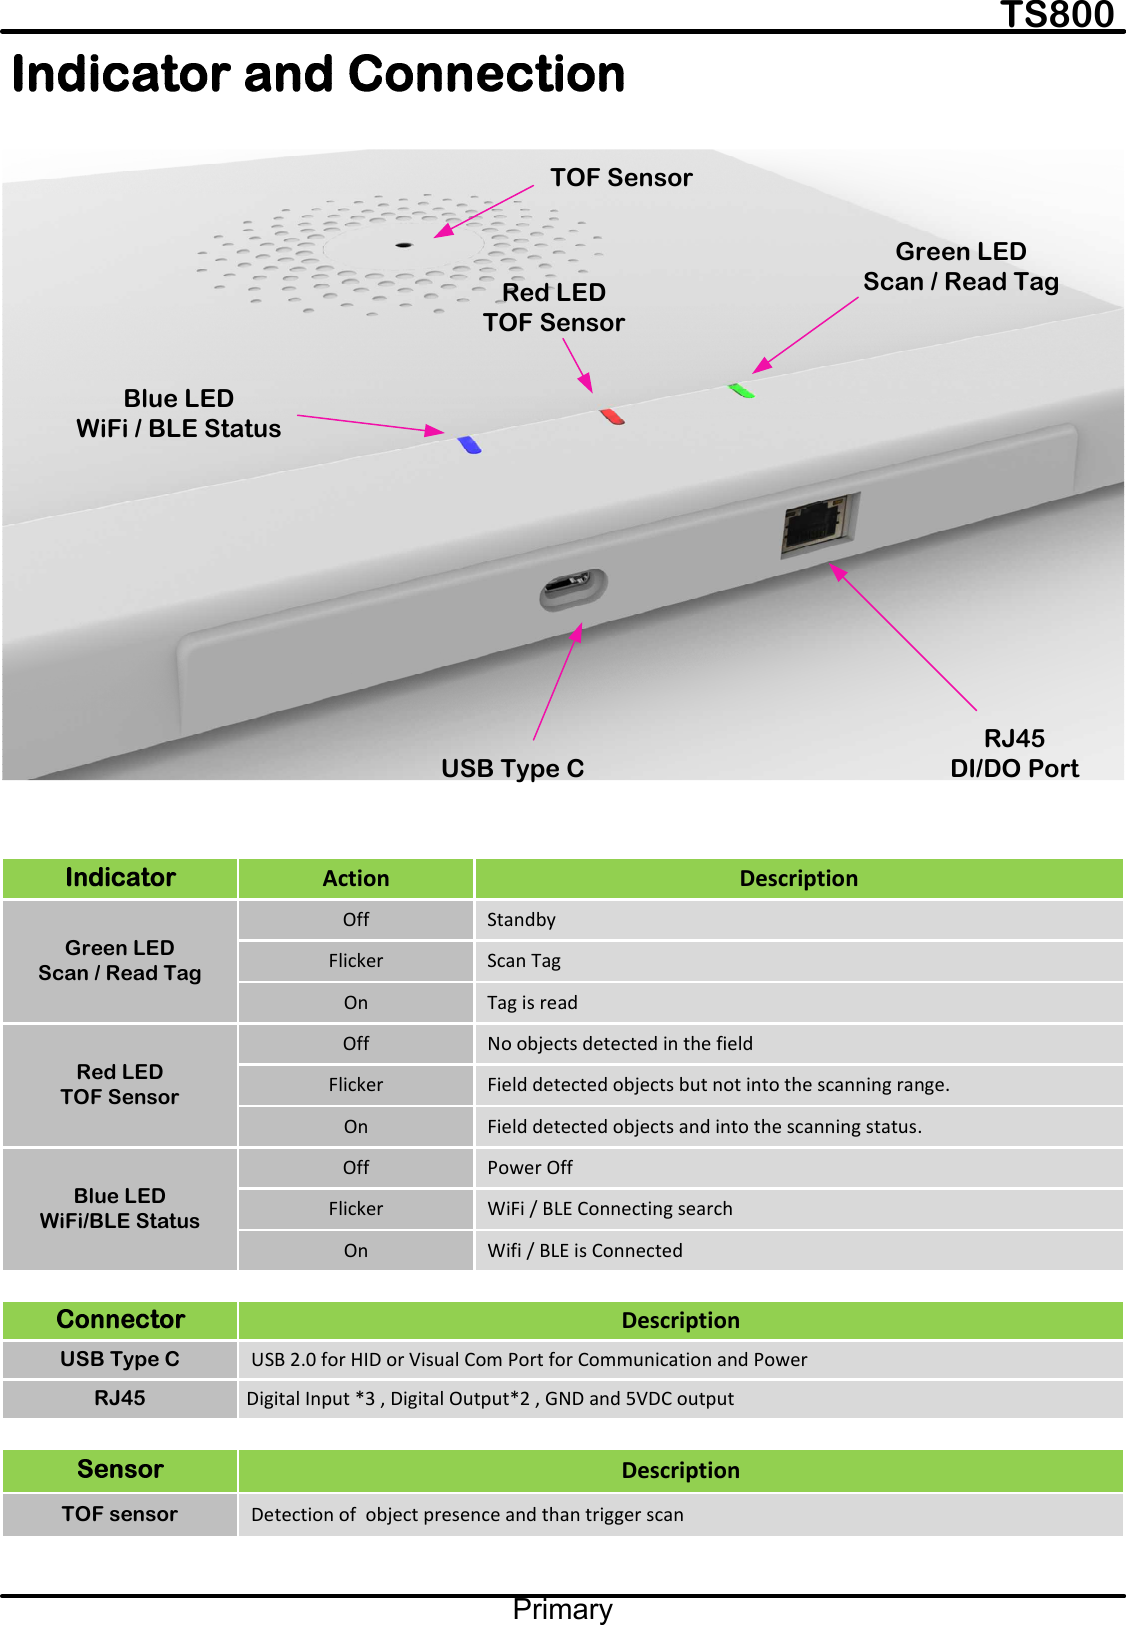 TS800PrimaryTOF SensorBlue LEDWiFi / BLE StatusGreen LEDScan / Read TagRed LEDTOF SensorUSB Type CRJ45 DI/DO PortGreen LEDScan / Read TagOff StandbyAction DescriptionFlicker Scan TagOn Tag is readRed LEDTOF SensorBlue LEDWiFi/BLE StatusOff Power OffFlicker WiFi / BLE Connecting searchOn Wifi / BLE is ConnectedUSB 2.0 for HID or Visual Com Port for Communication and Power DescriptionUSB Type CDigital Input *3 , Digital Output*2 , GND and 5VDC outputRJ45Detection of  object presence and than trigger scanDescriptionTOF sensorOff No objects detected in the fieldFlicker Field detected objects but not into the scanning range.On Field detected objects and into the scanning status.